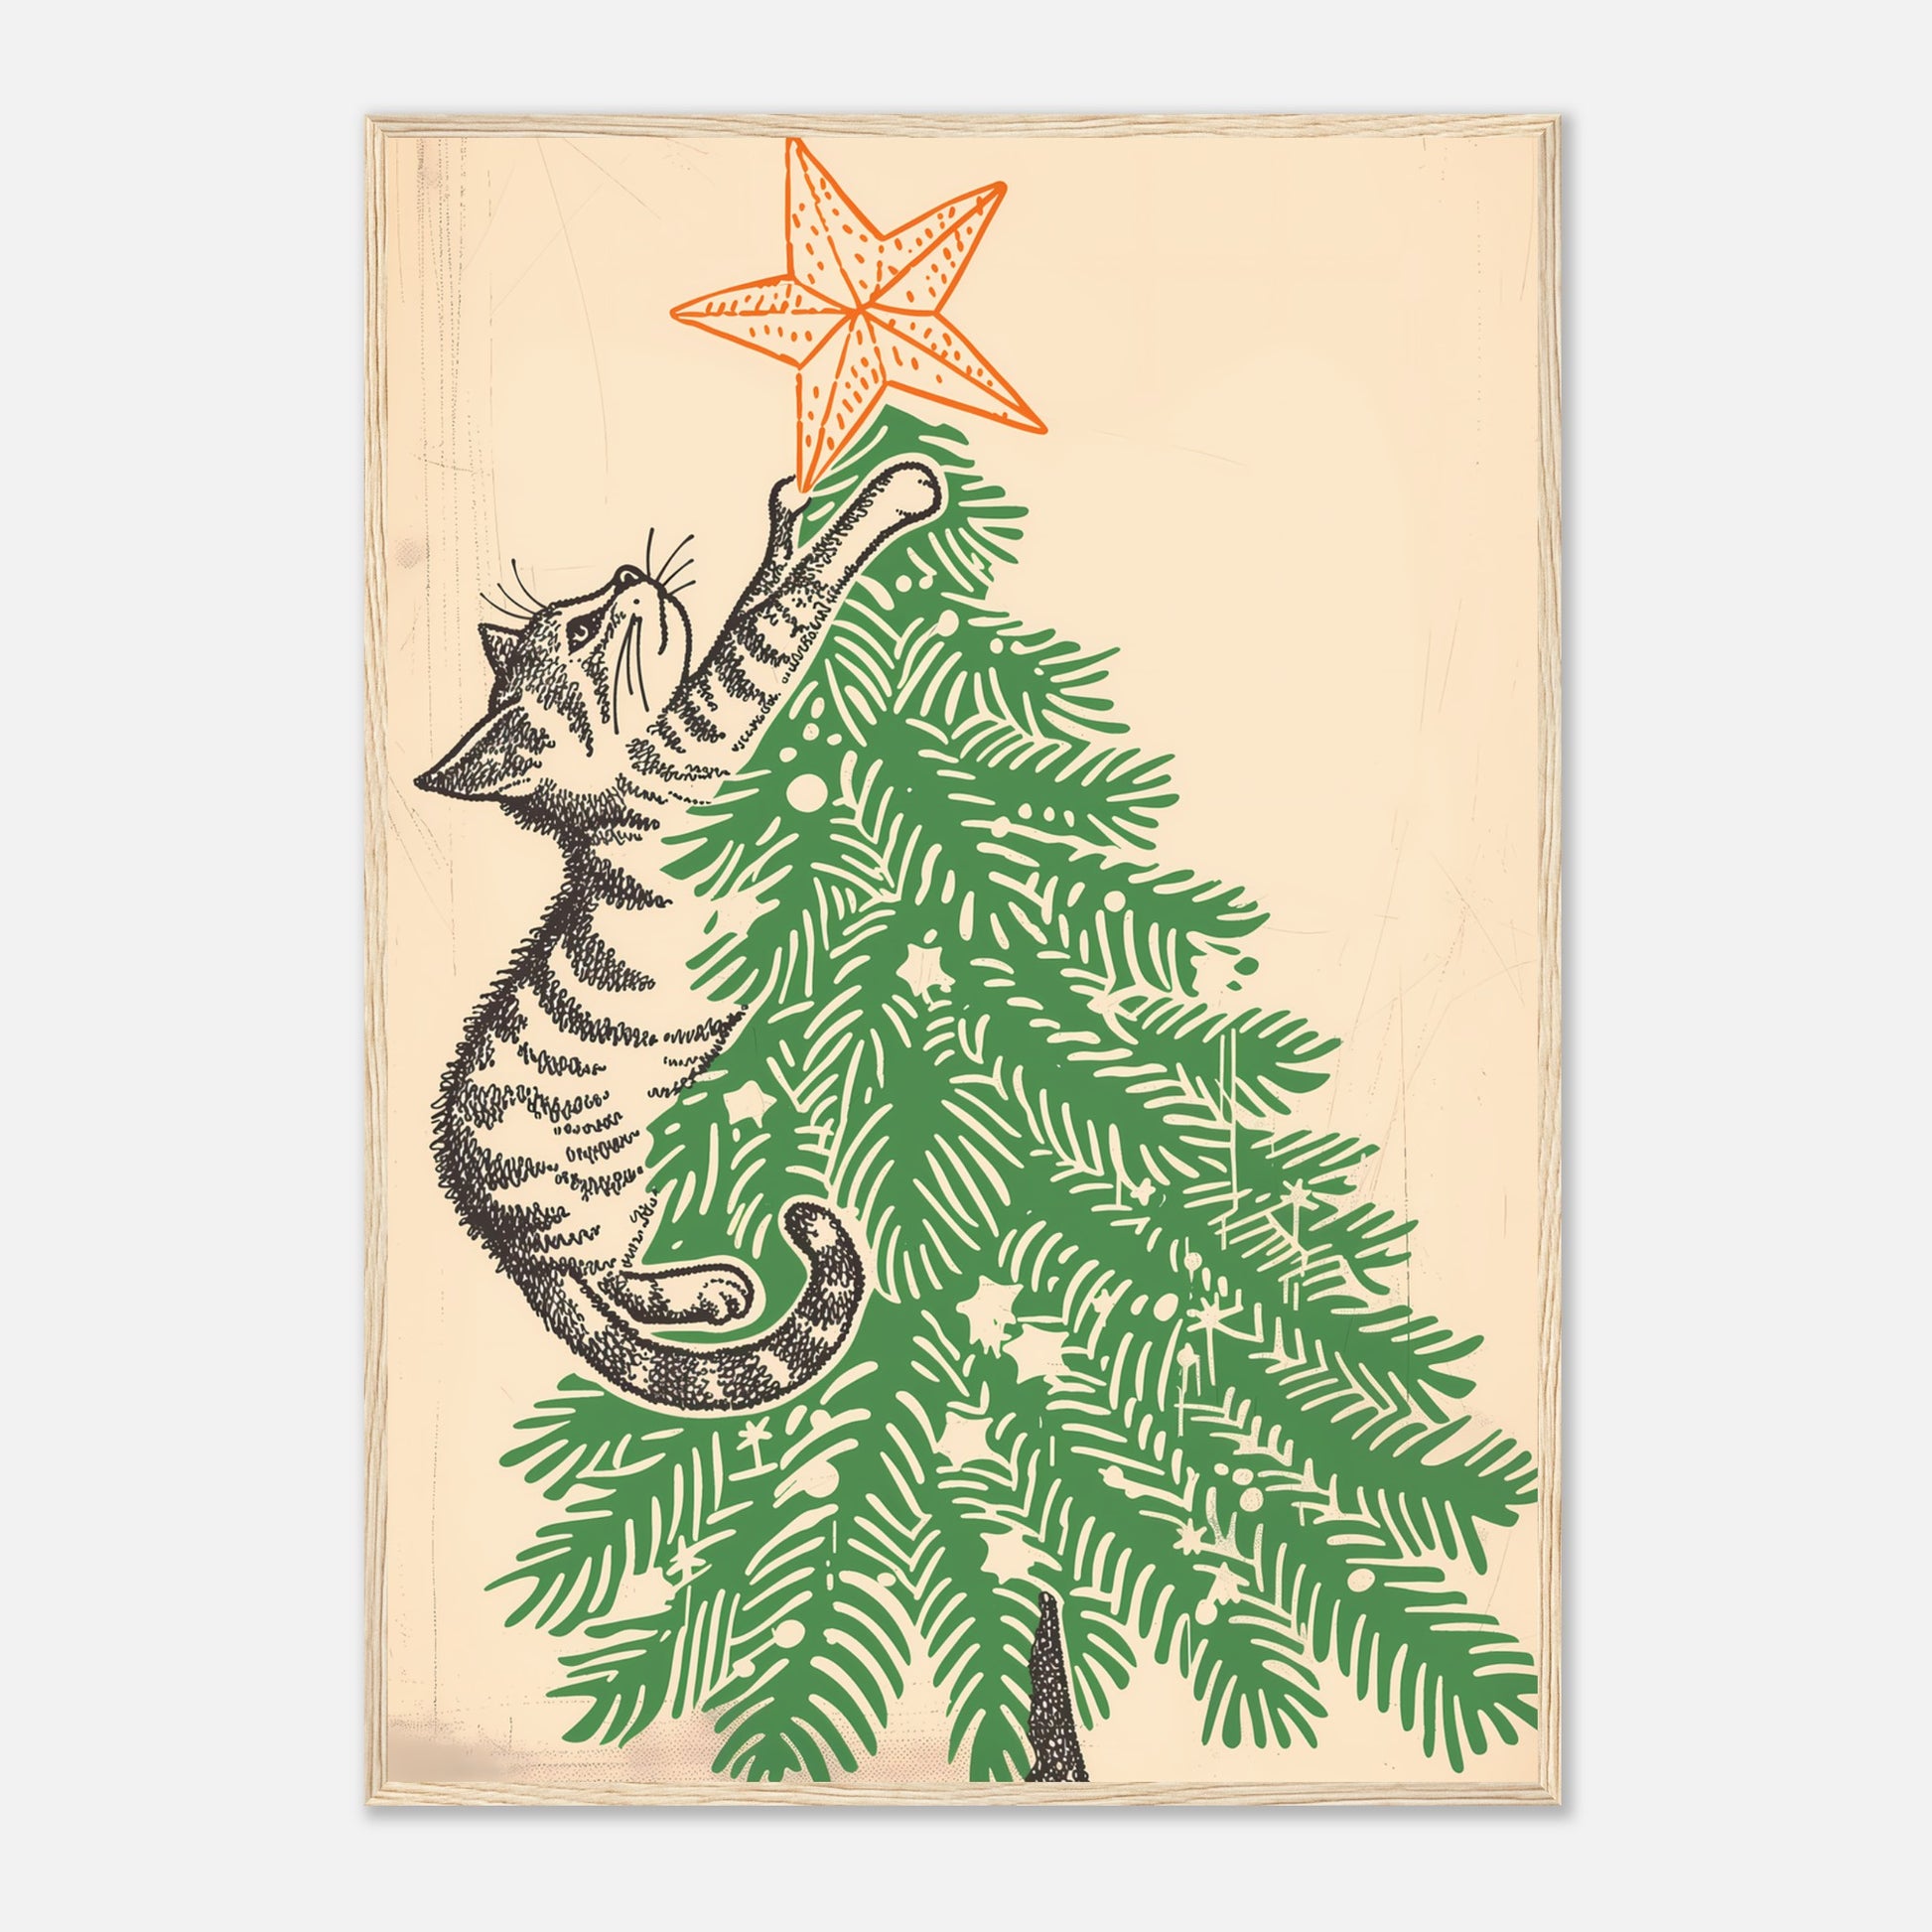 Illustration of a cat reaching up to place a star on top of a Christmas tree.